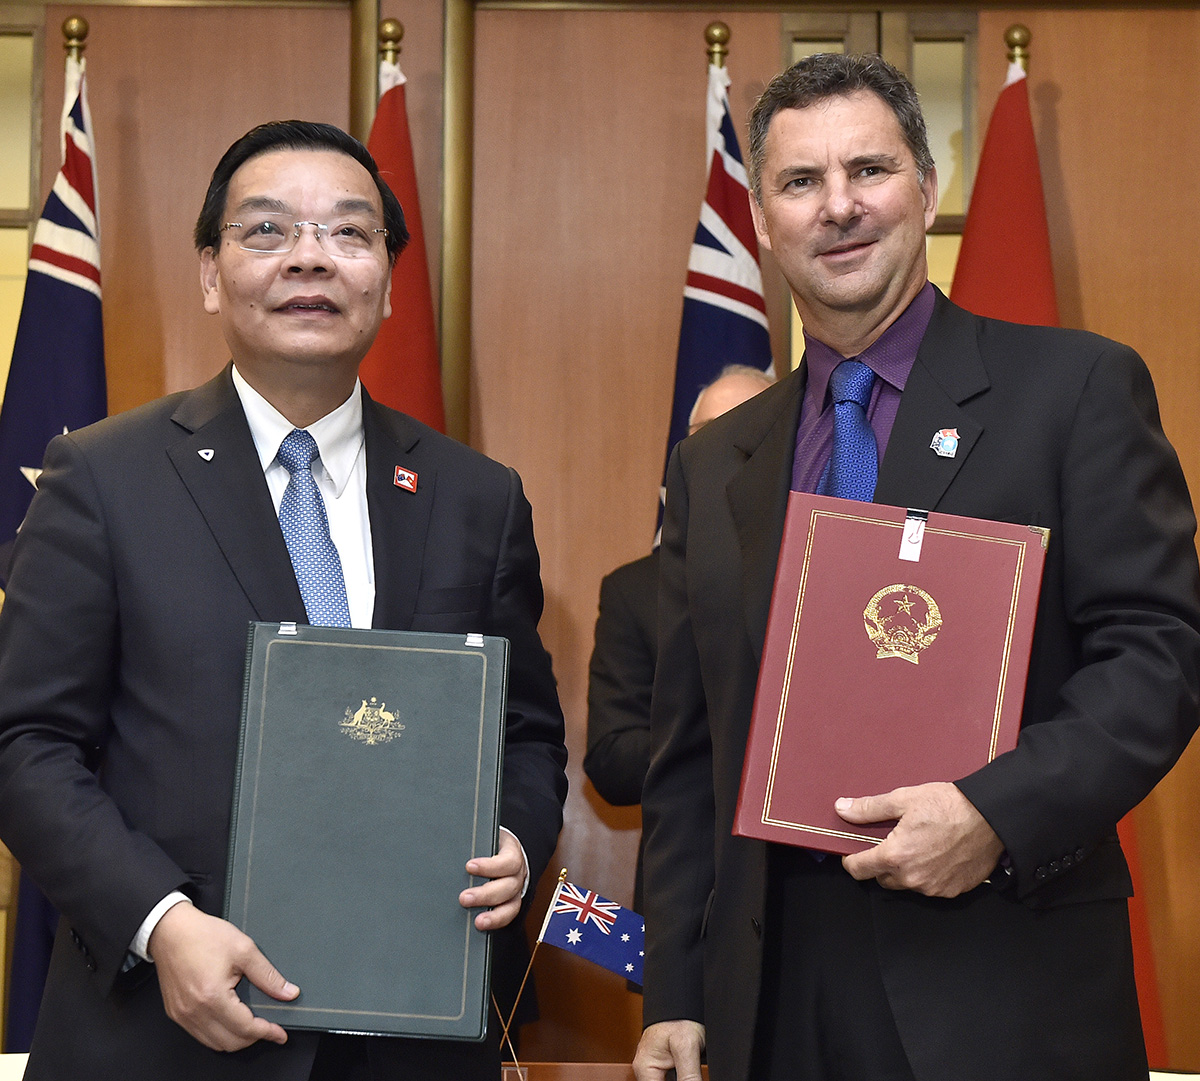 CSIRO and the Ministry of Science and Technology of Vietnam (MOST) signed a Partnership MoU to lay a solid ground for further collaboration in Science, Technology and Innovation to make the best of opportunities brought by Industry 4.0. The signing was undertaken during the official visit to Australia by H.E. Mr Nguyen Xuan Phuc, Prime Minister of Vietnam in March 2018.